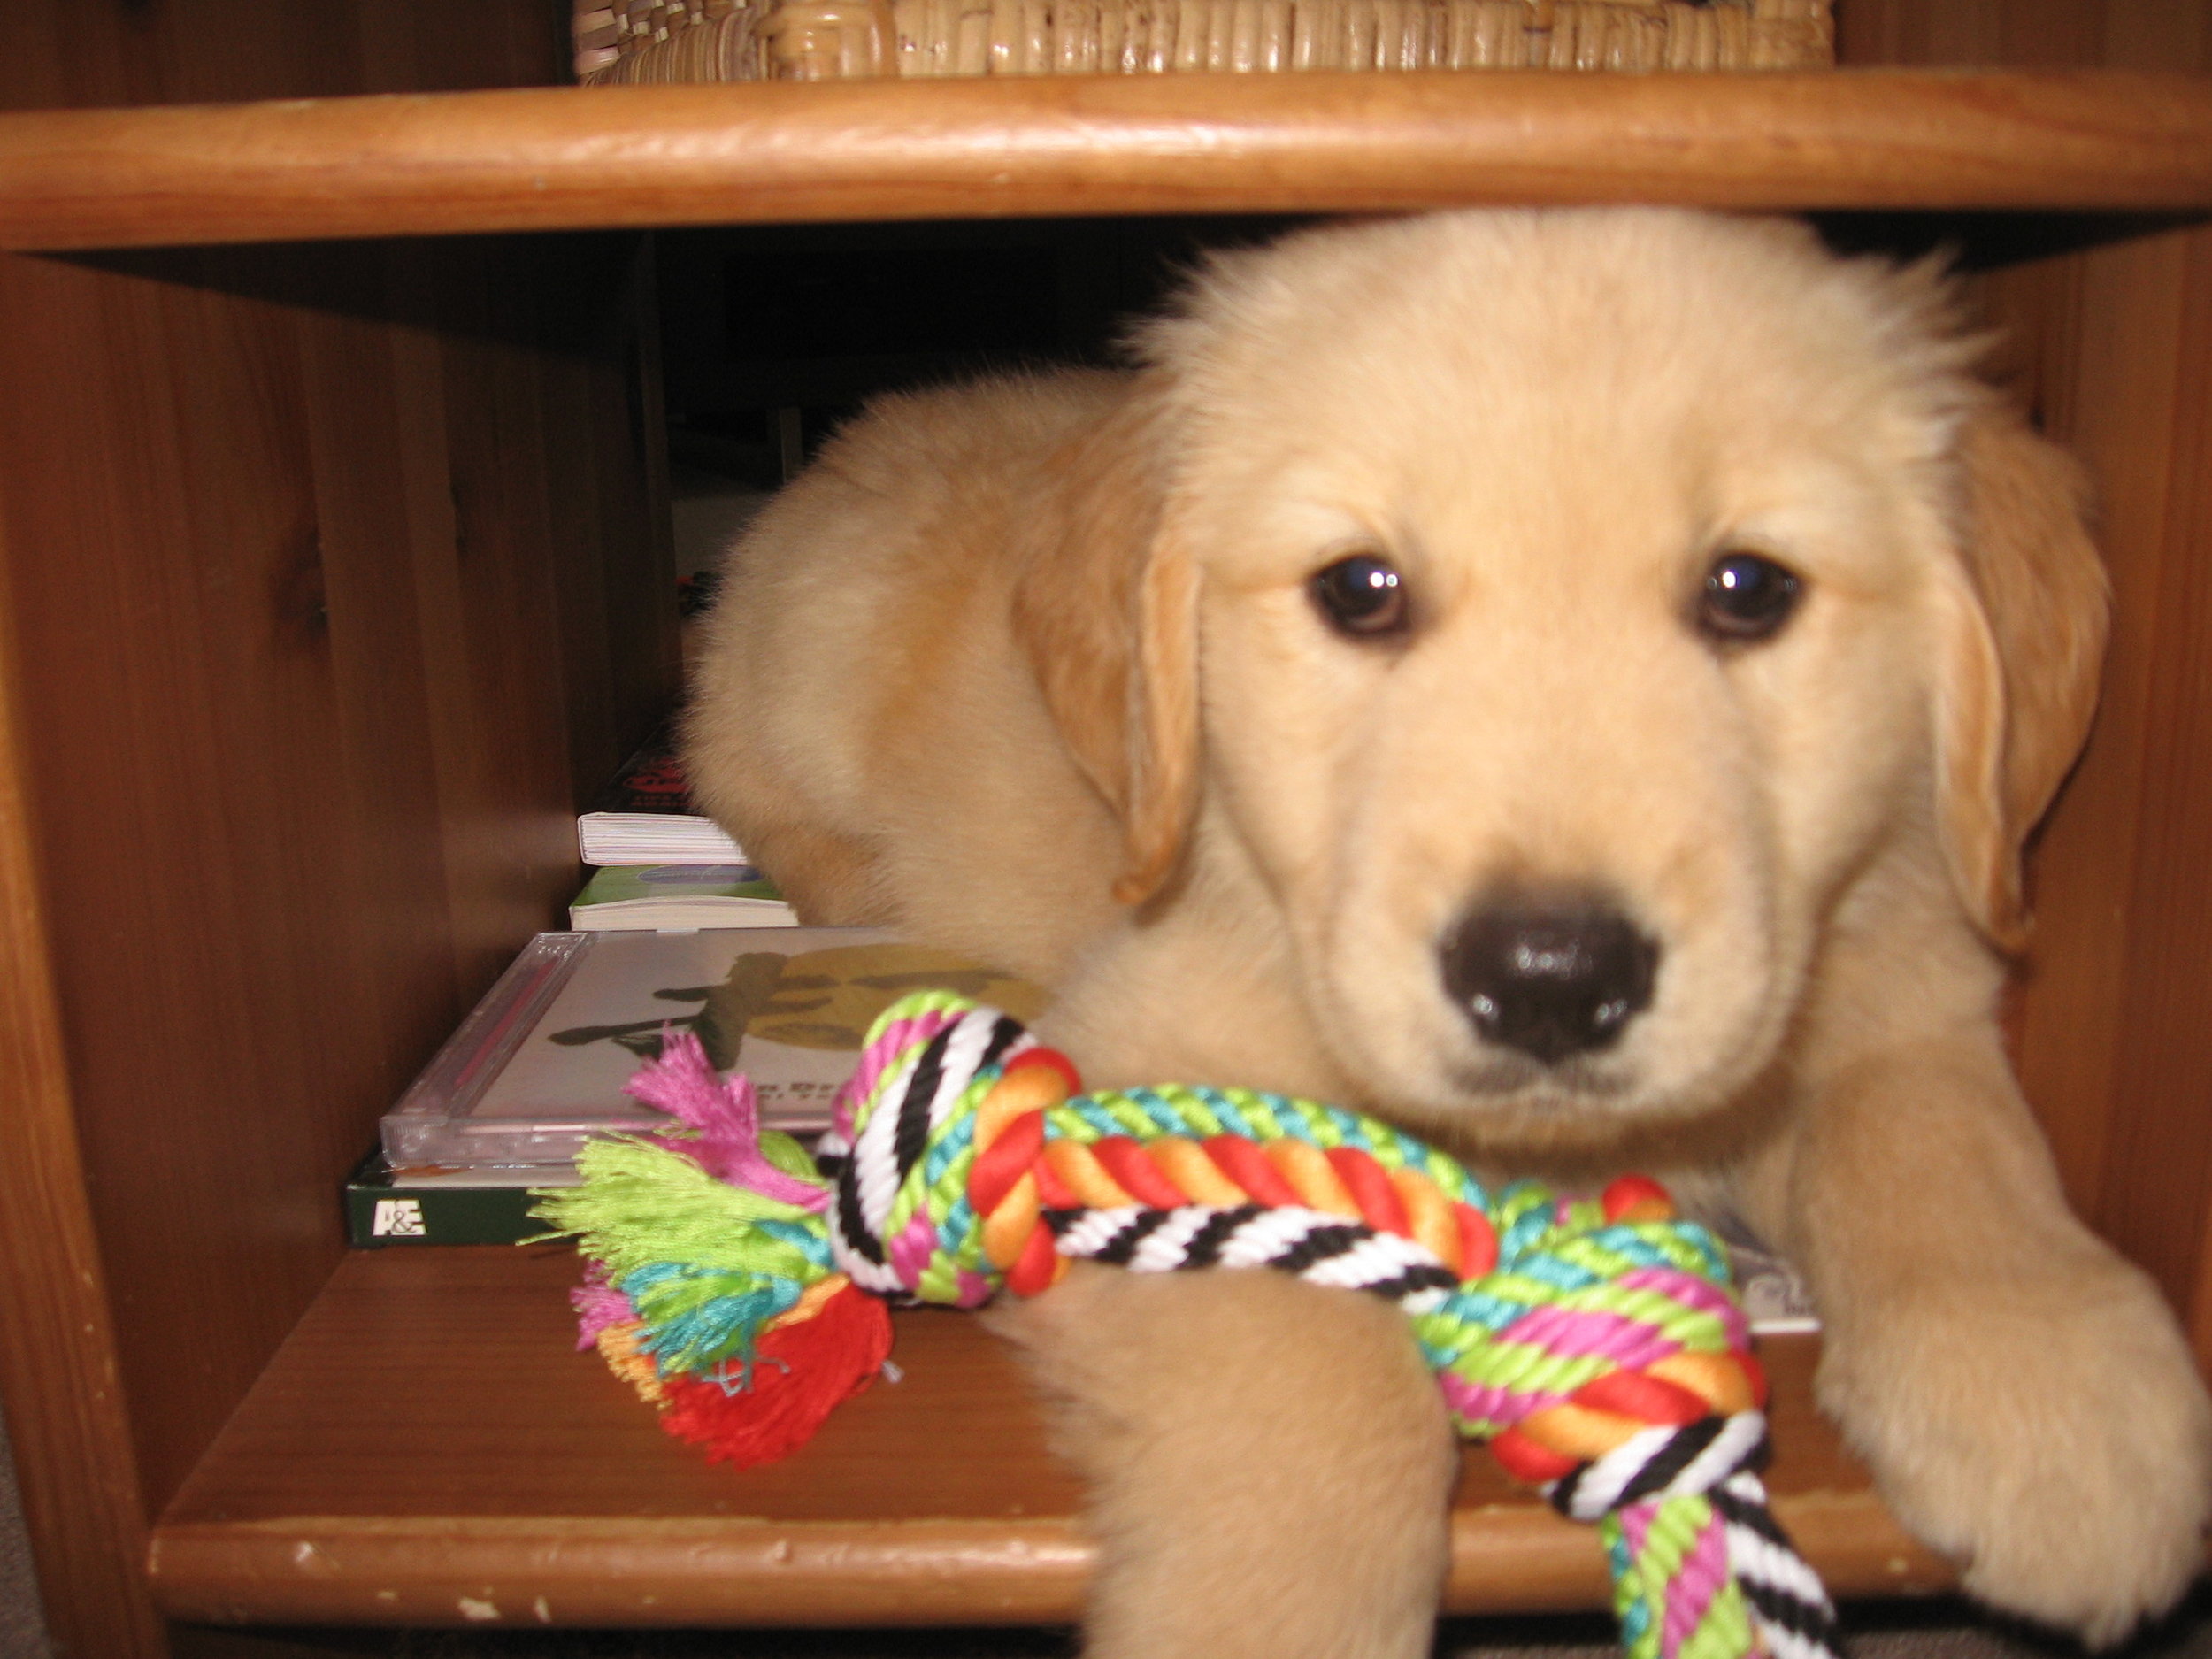  Puppy Sam loved to sit in the cubbyhole of our old coffee table. 